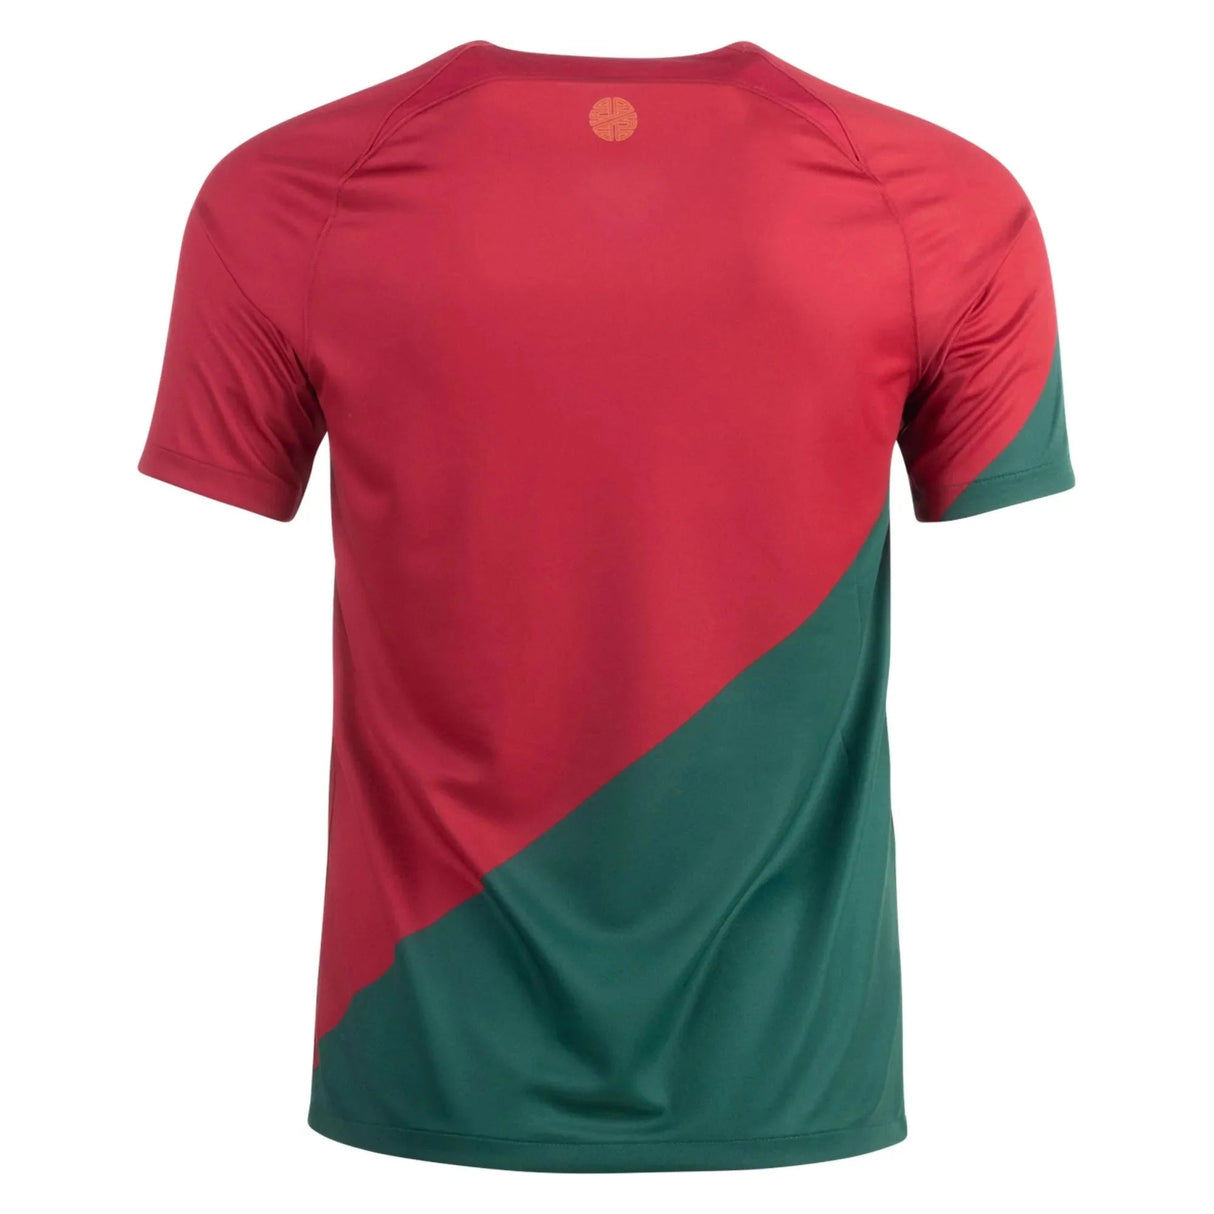 Portugal Jersey - Jersey and Sneakers